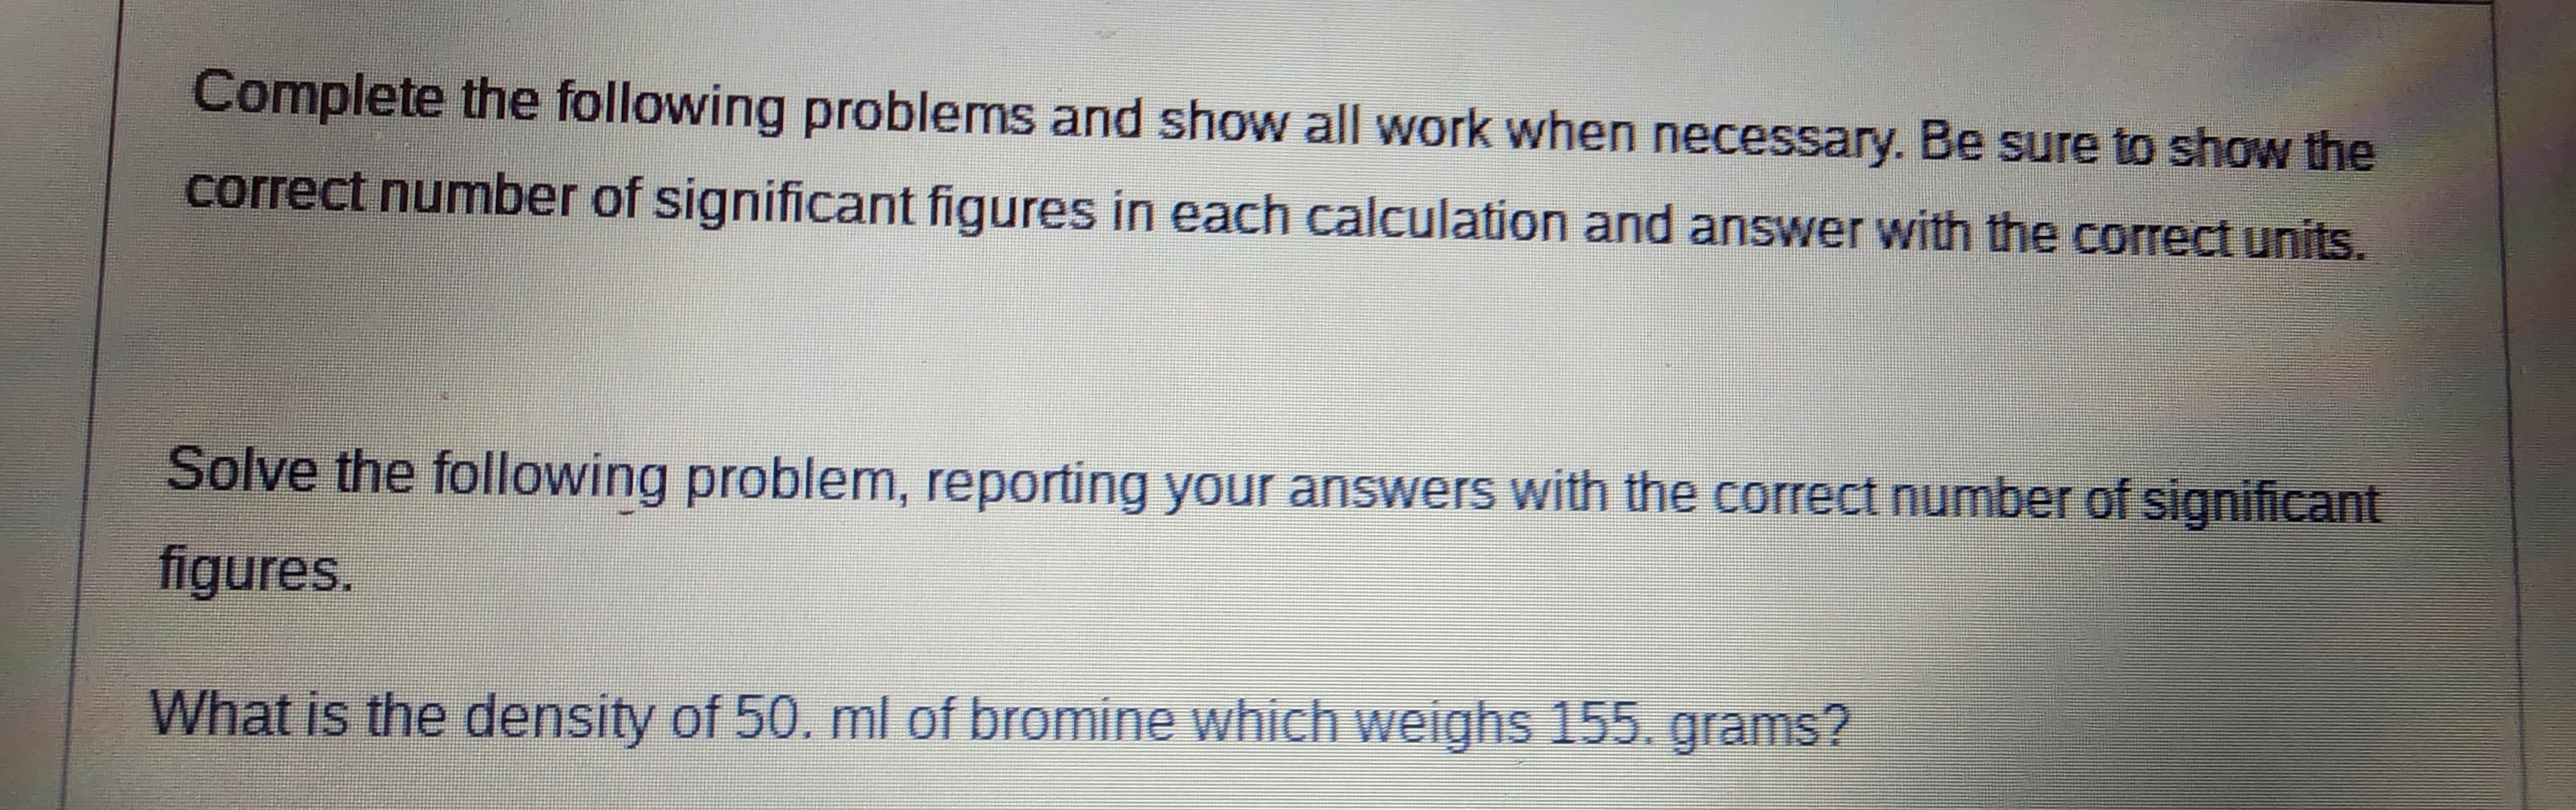 Complete the following problems and show all work when necessary. Be sure to show the
correct number of significant figures in each calculation and answer with the correct units.
Solve the following problem, reporting your answers with the correct number of significant
figures.
What is the density of 50. ml of bromine which weighs 155. grams?